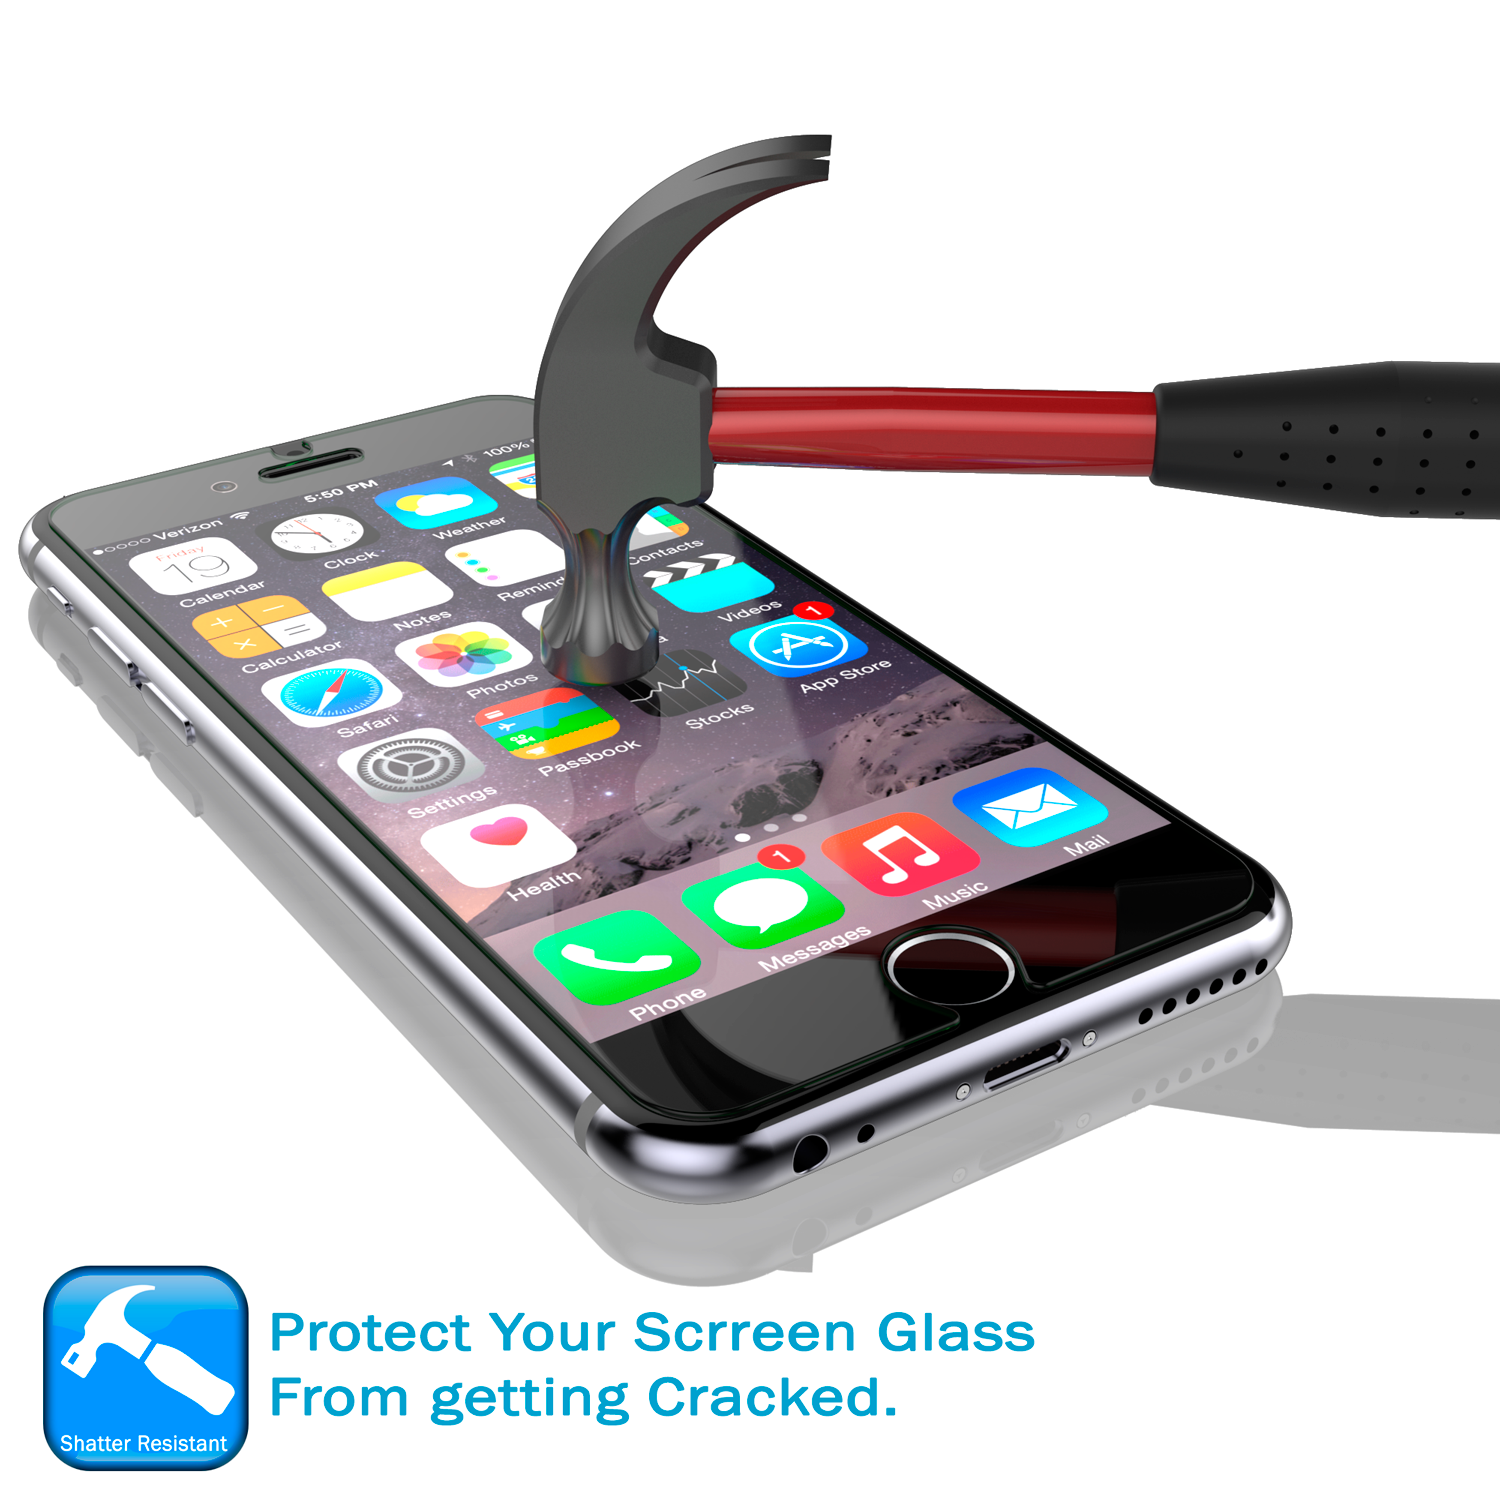 iPhone 5/5s/5c Punkcase Glass SHIELD Tempered Glass Screen Protector 0.33mm Thick 9H Glass Screen